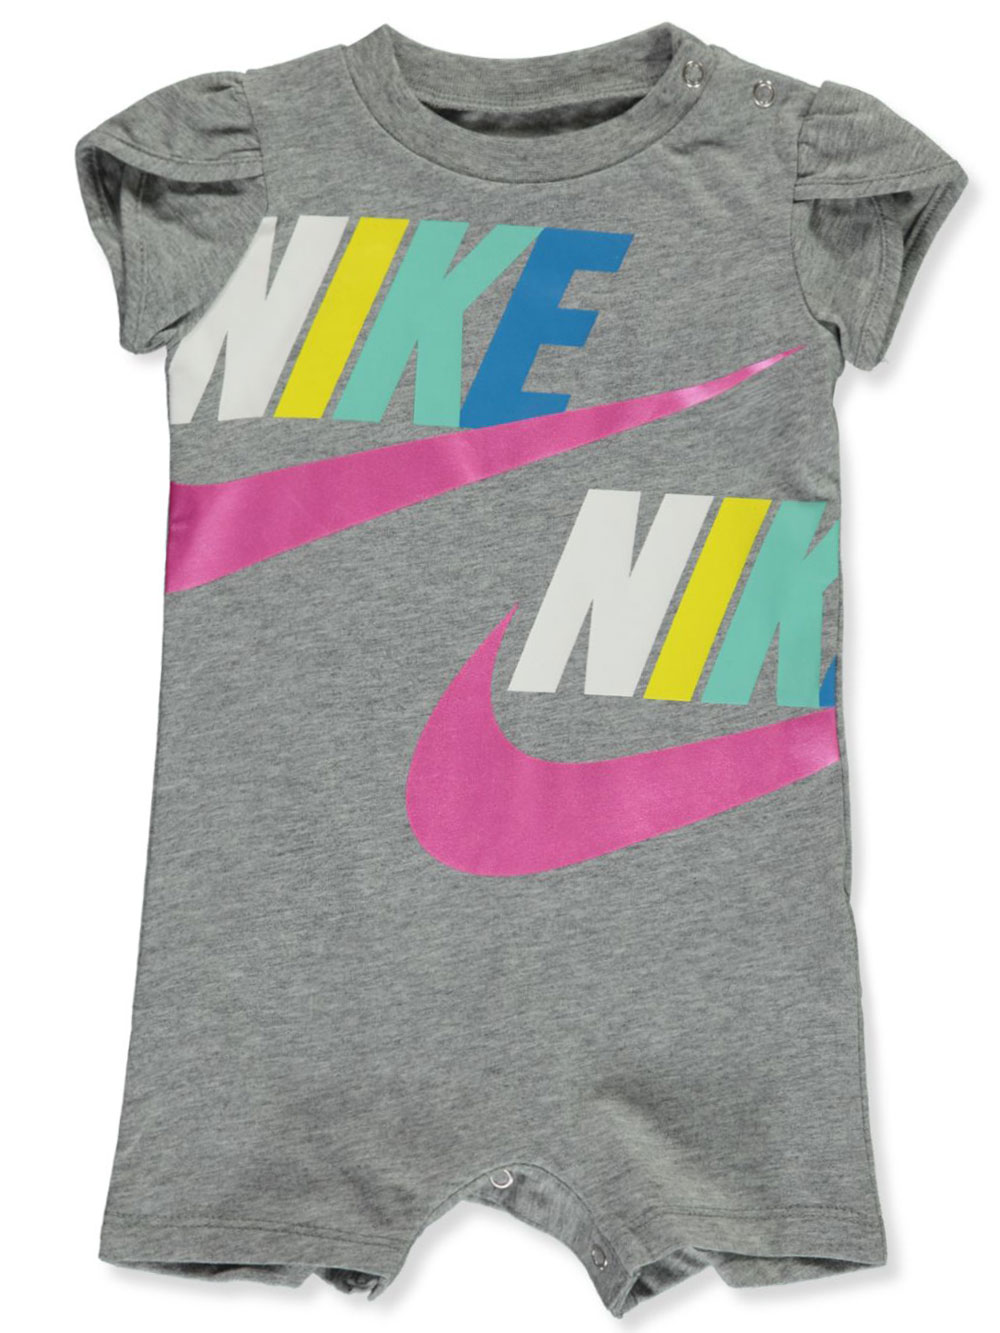 3t nike girl clothes